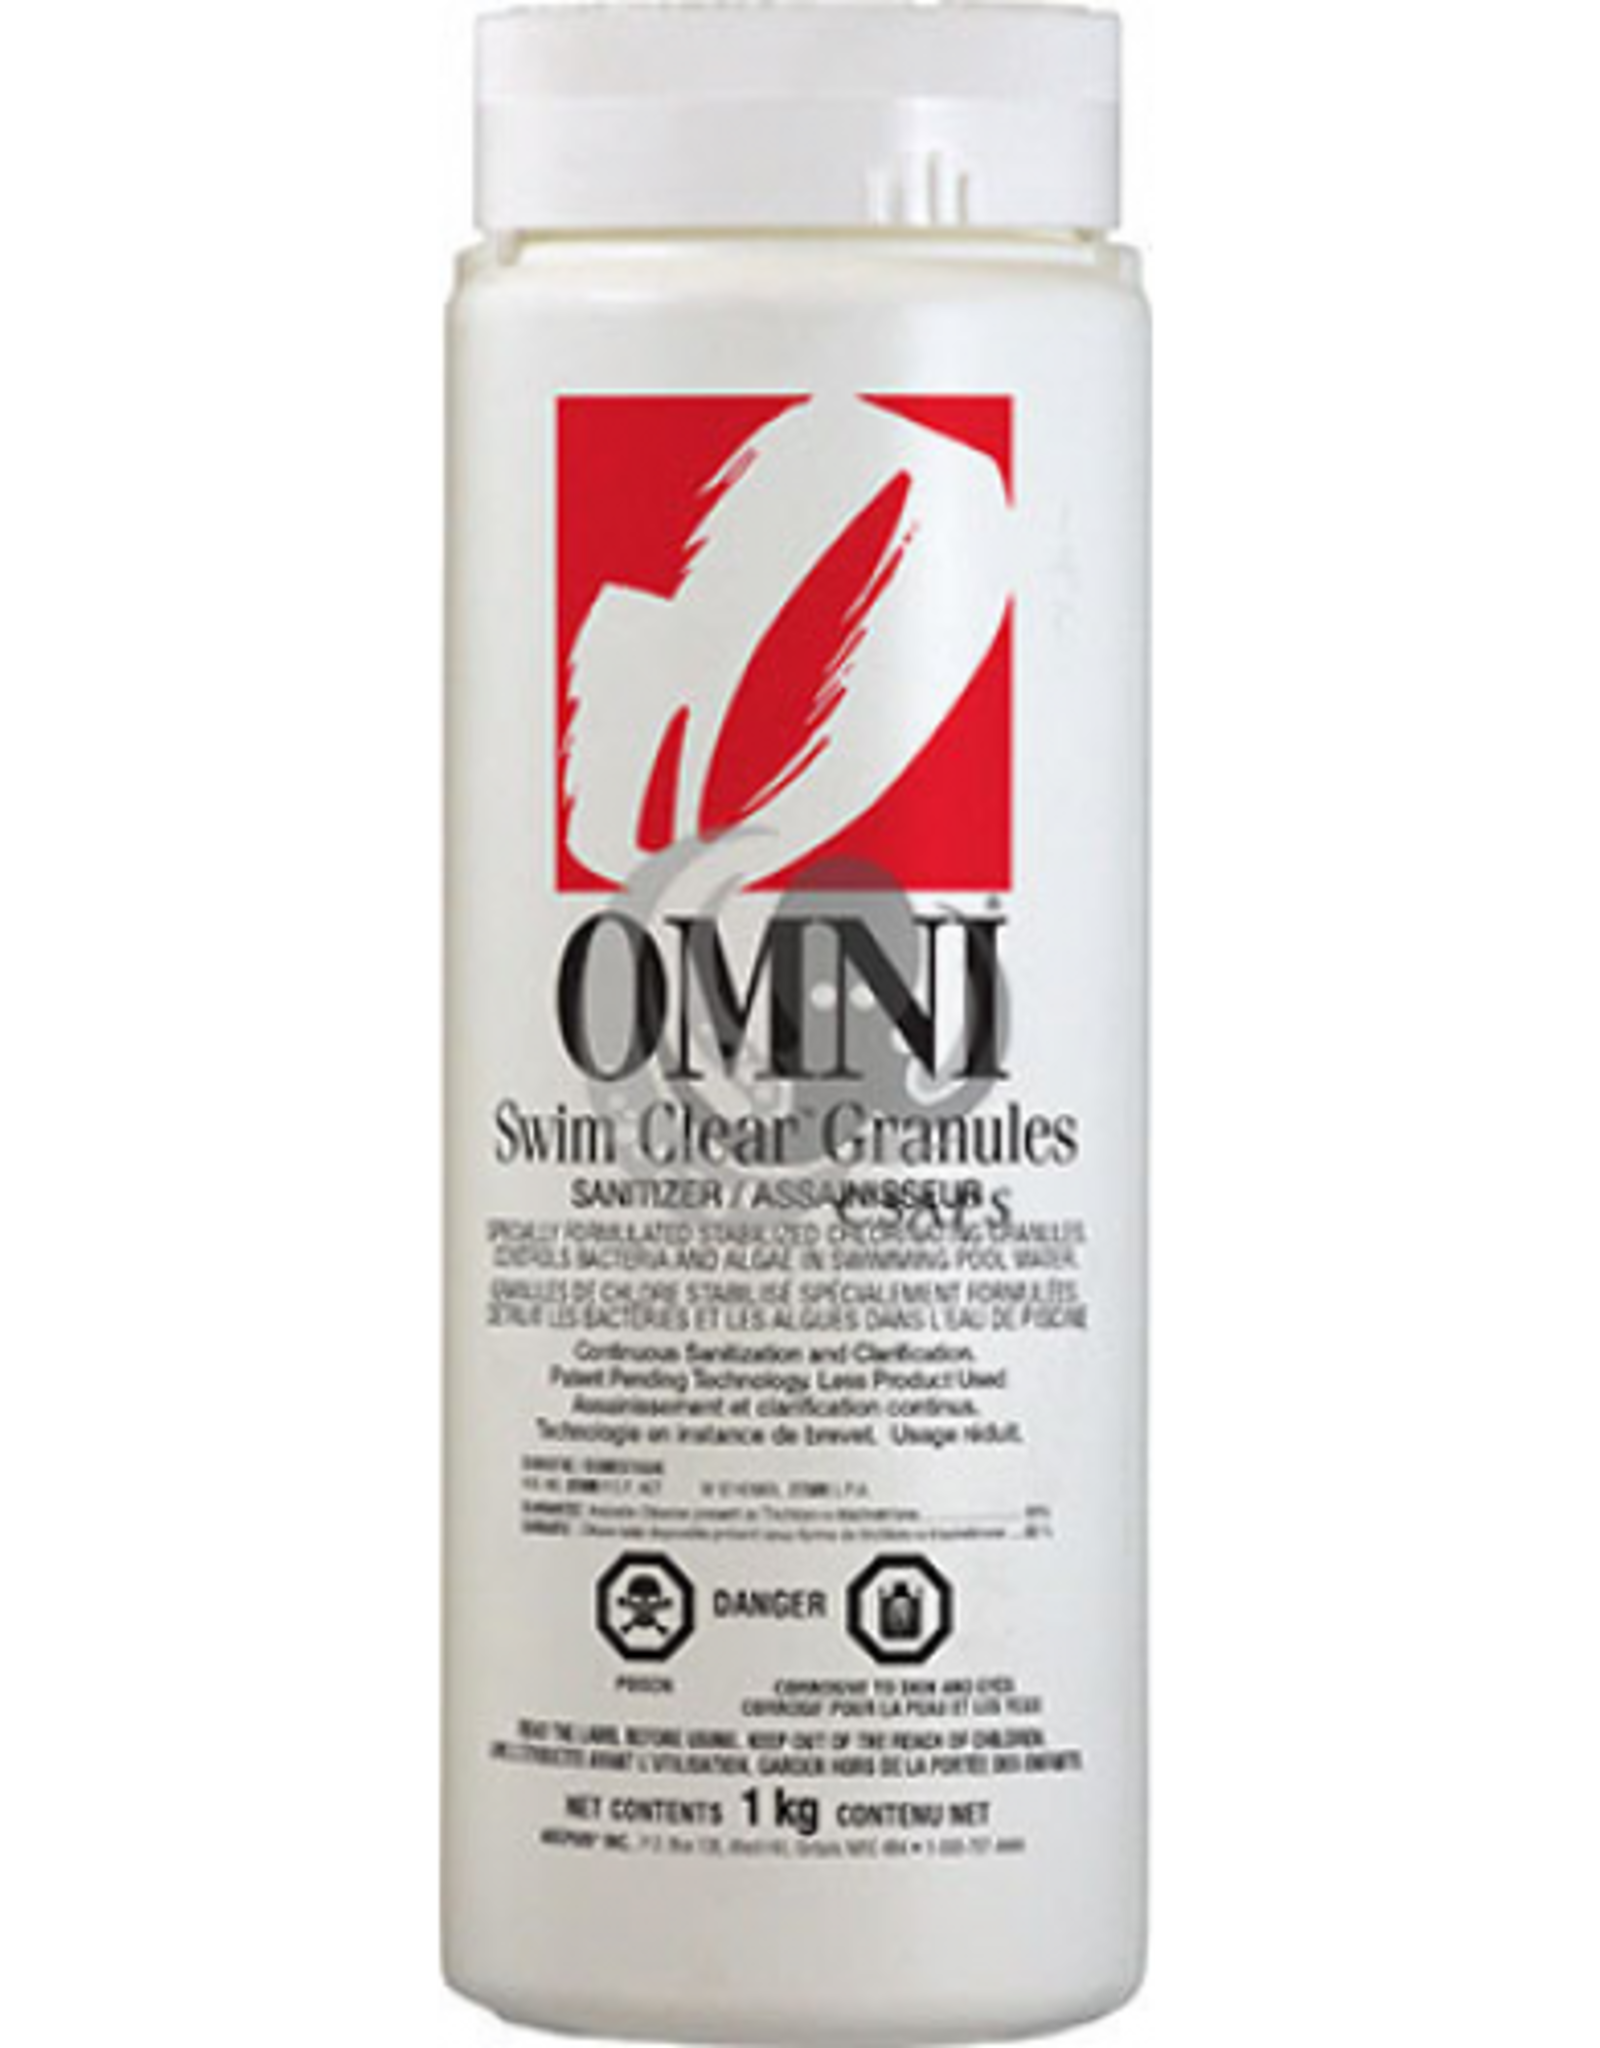 OMNI OMNI SWIM CLEARState of Matter: Powder  maintain a free available chlorine residual between 1-3 ppm for continuous sanitation  amount of product required & frequency of application will vary with the # of swimmers, water temperature & weather cond